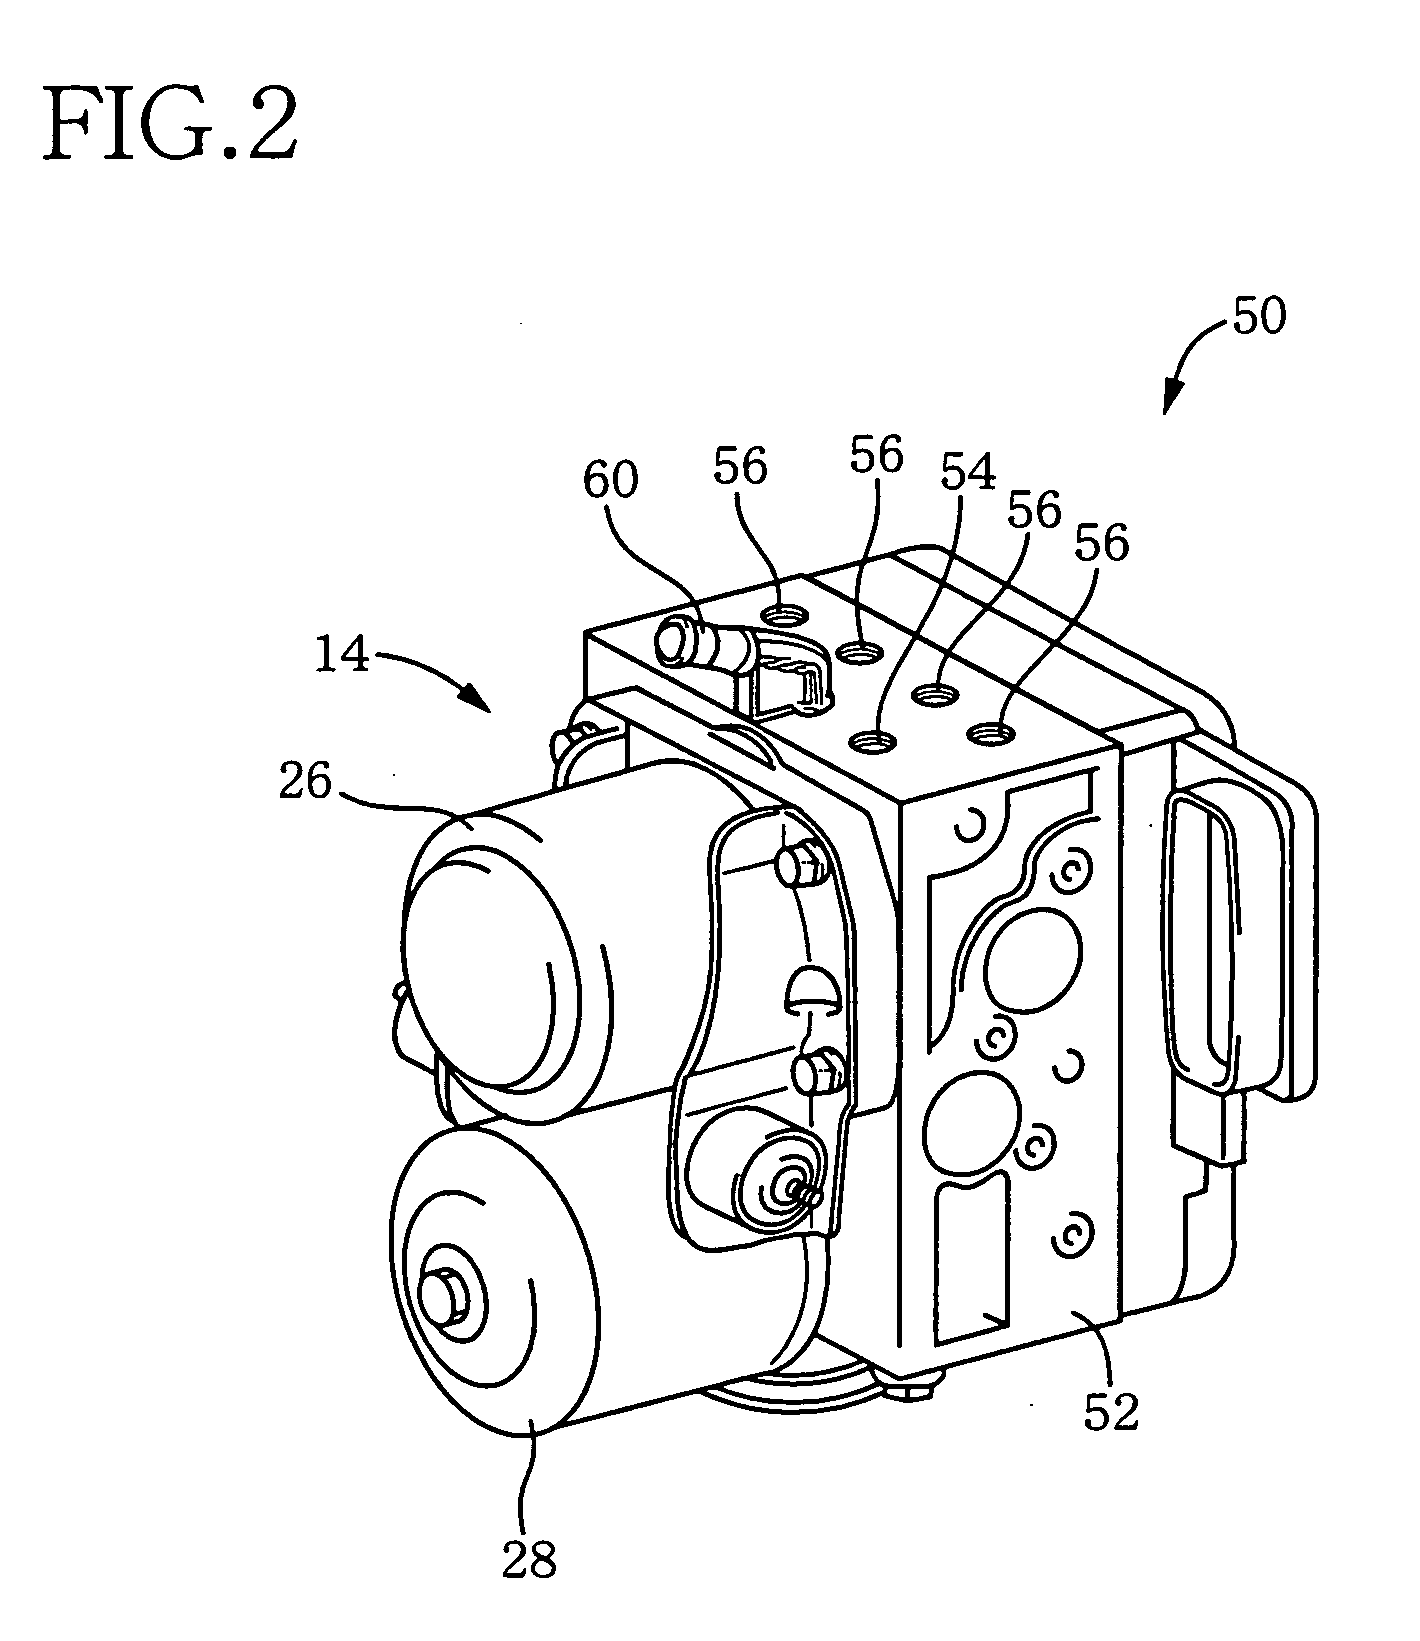 Controller for controlling actuator device installed on vehicle so as to maintain silence and comfort in vehicle